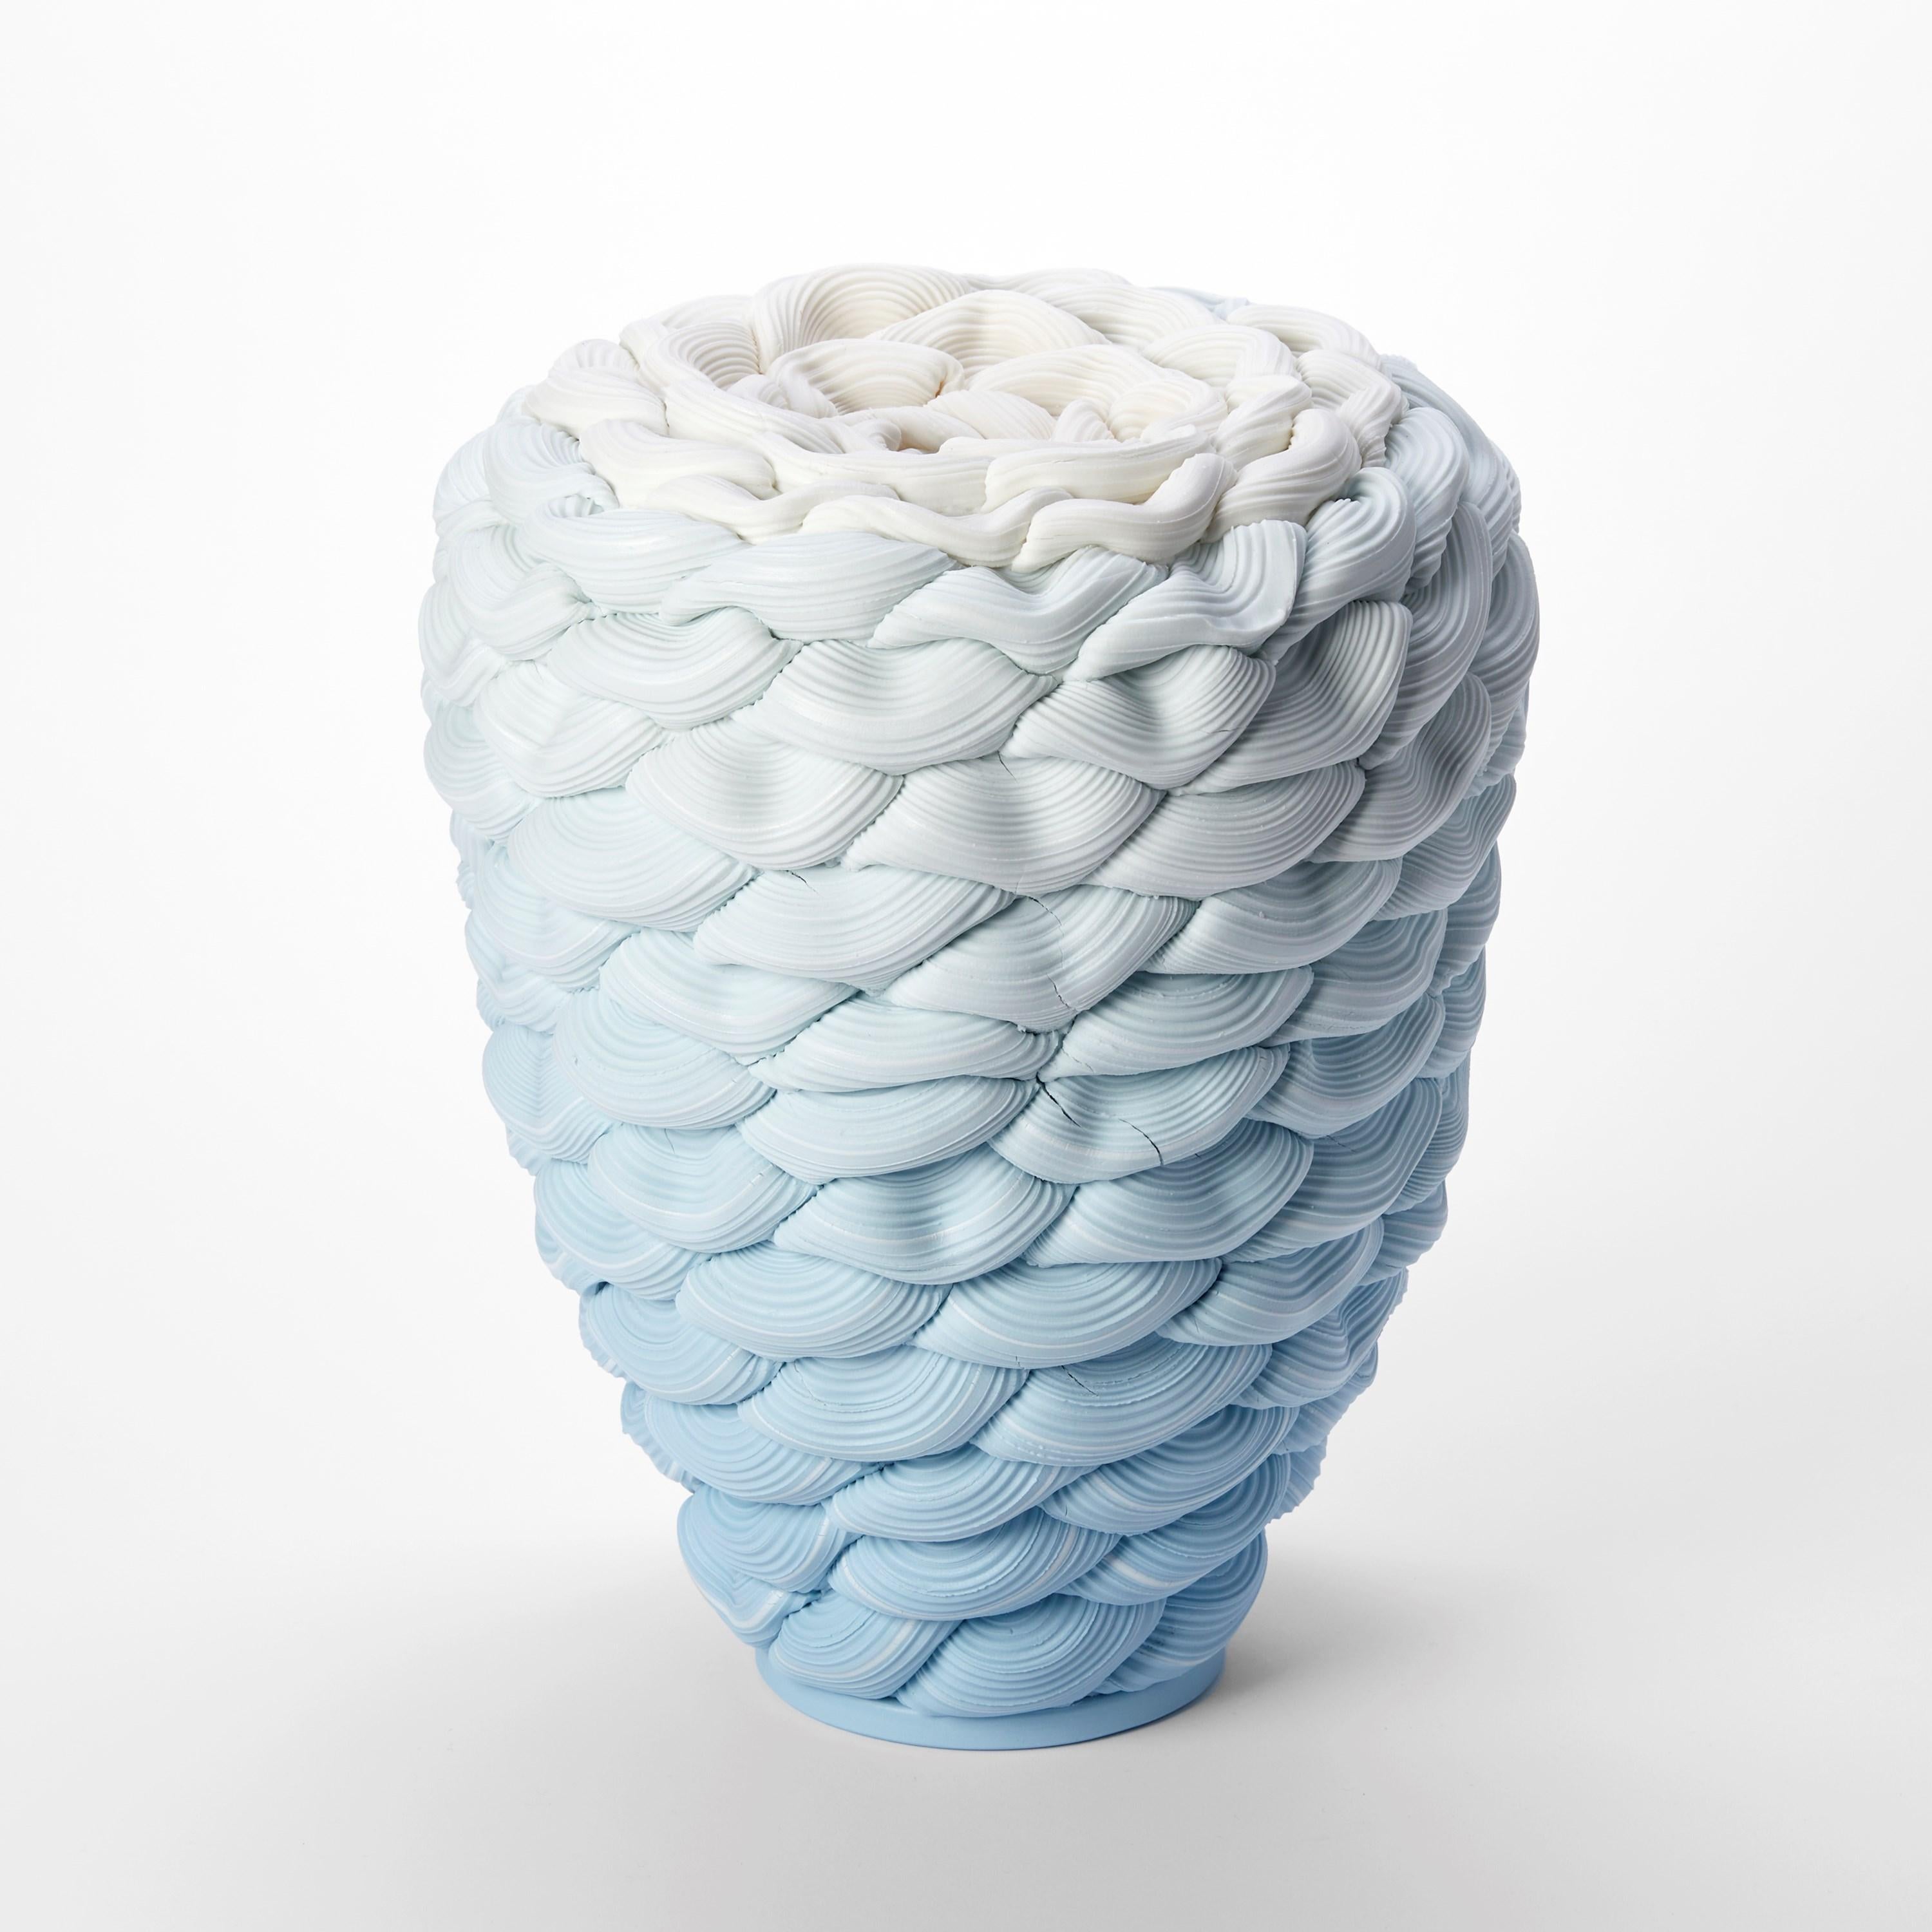 'Monochromatic Fold XI' is a unique sculpture by the British artist Steven Edwards, created from white and coloured parian porcelain.

Steven Edwards is a ceramic artist whose work investigates the language of making through the materiality and